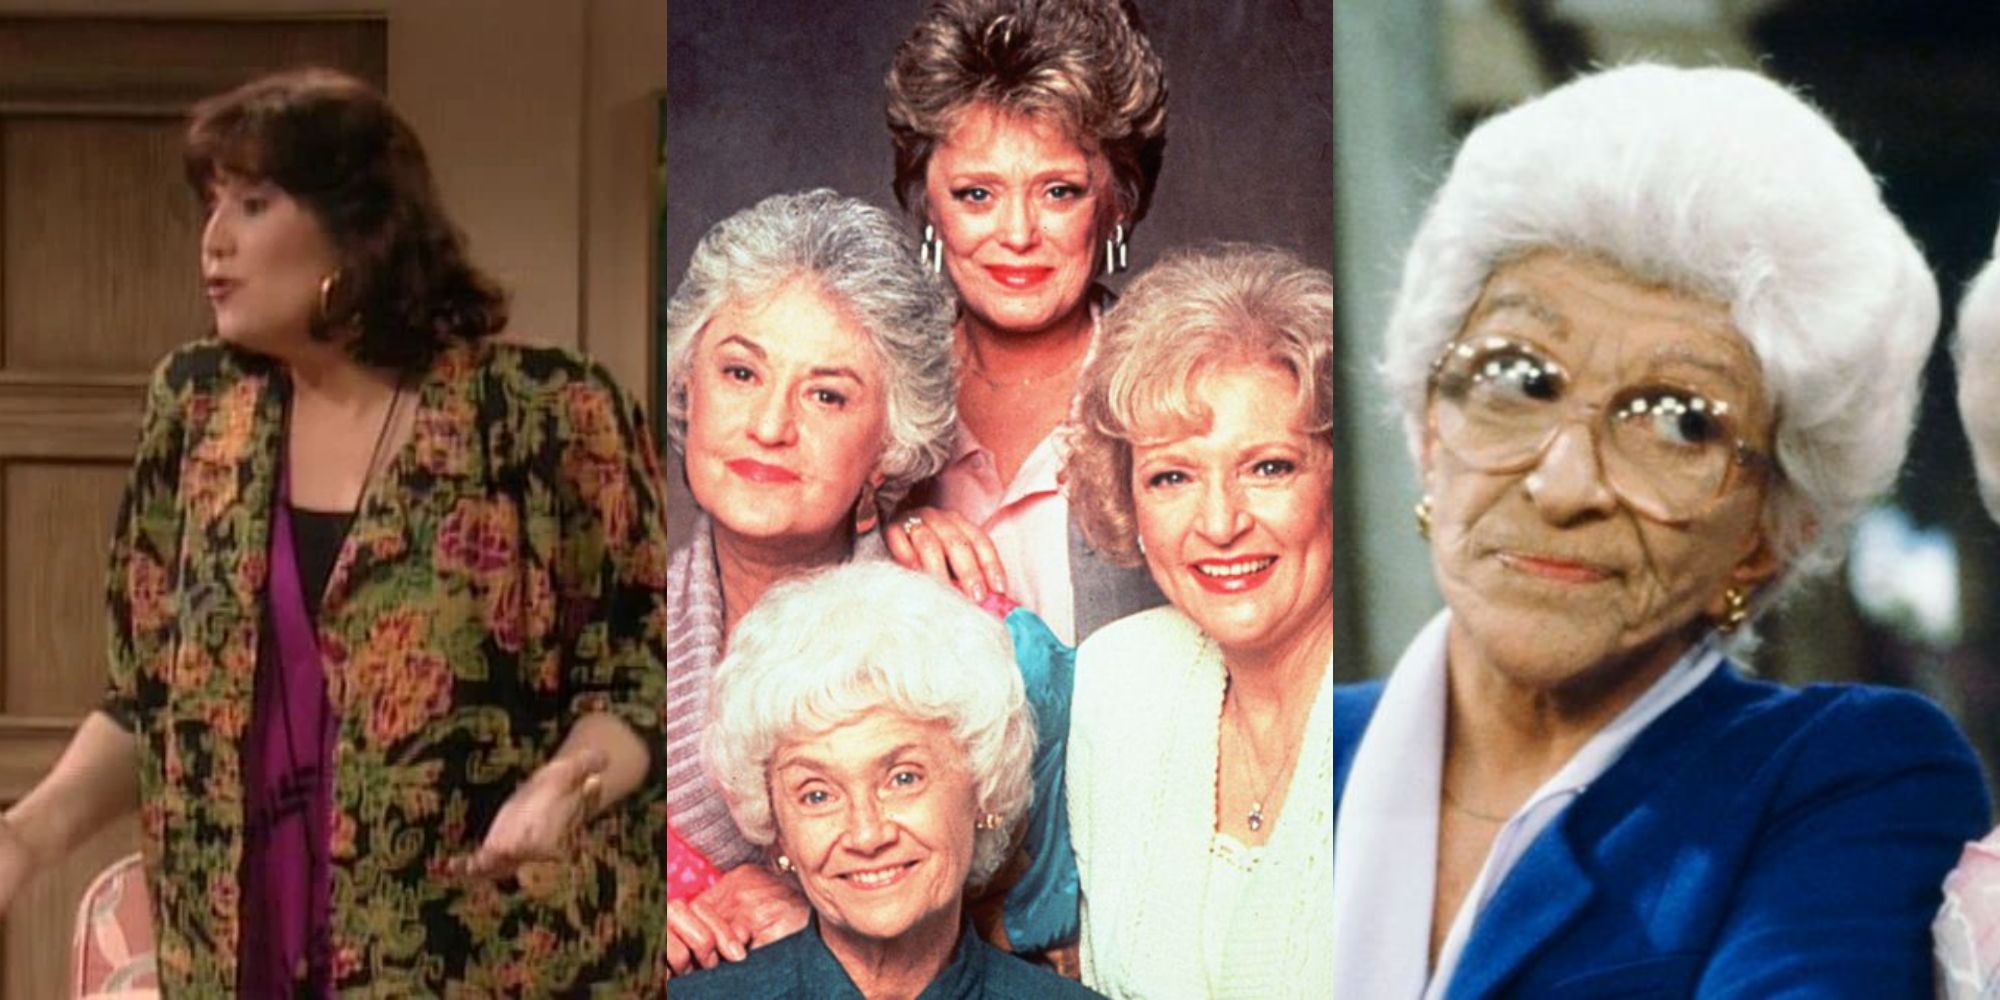 Three images of the cast of Golden Girls